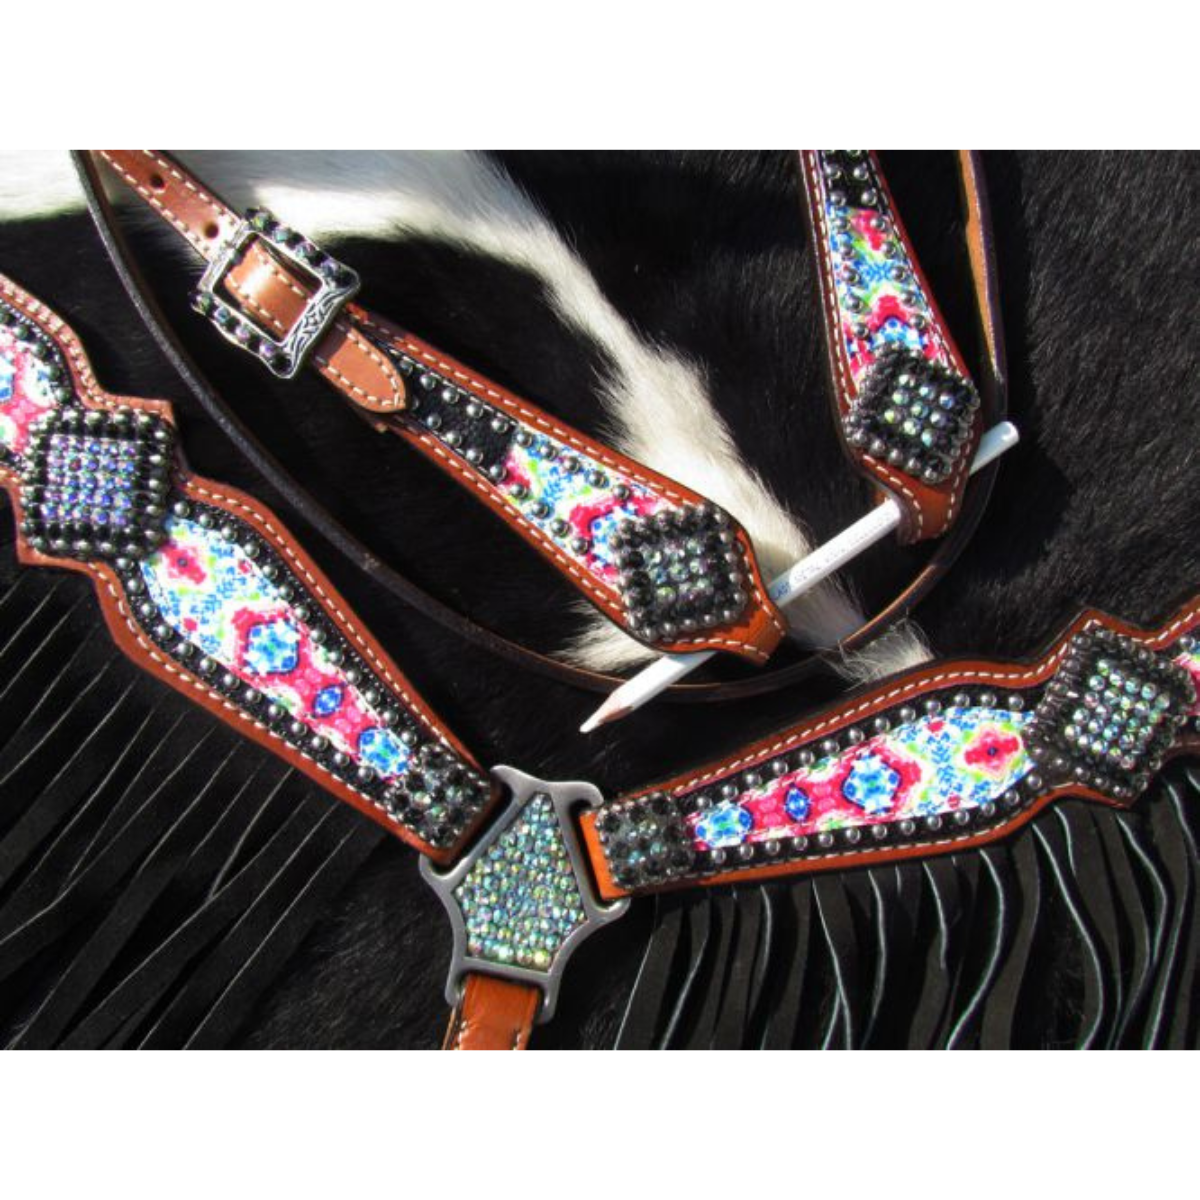 Showman ® Pony Size Pyschedelic Tie Dye browband headstall and breast collar set with black suede leather fringe. - Double T Saddles